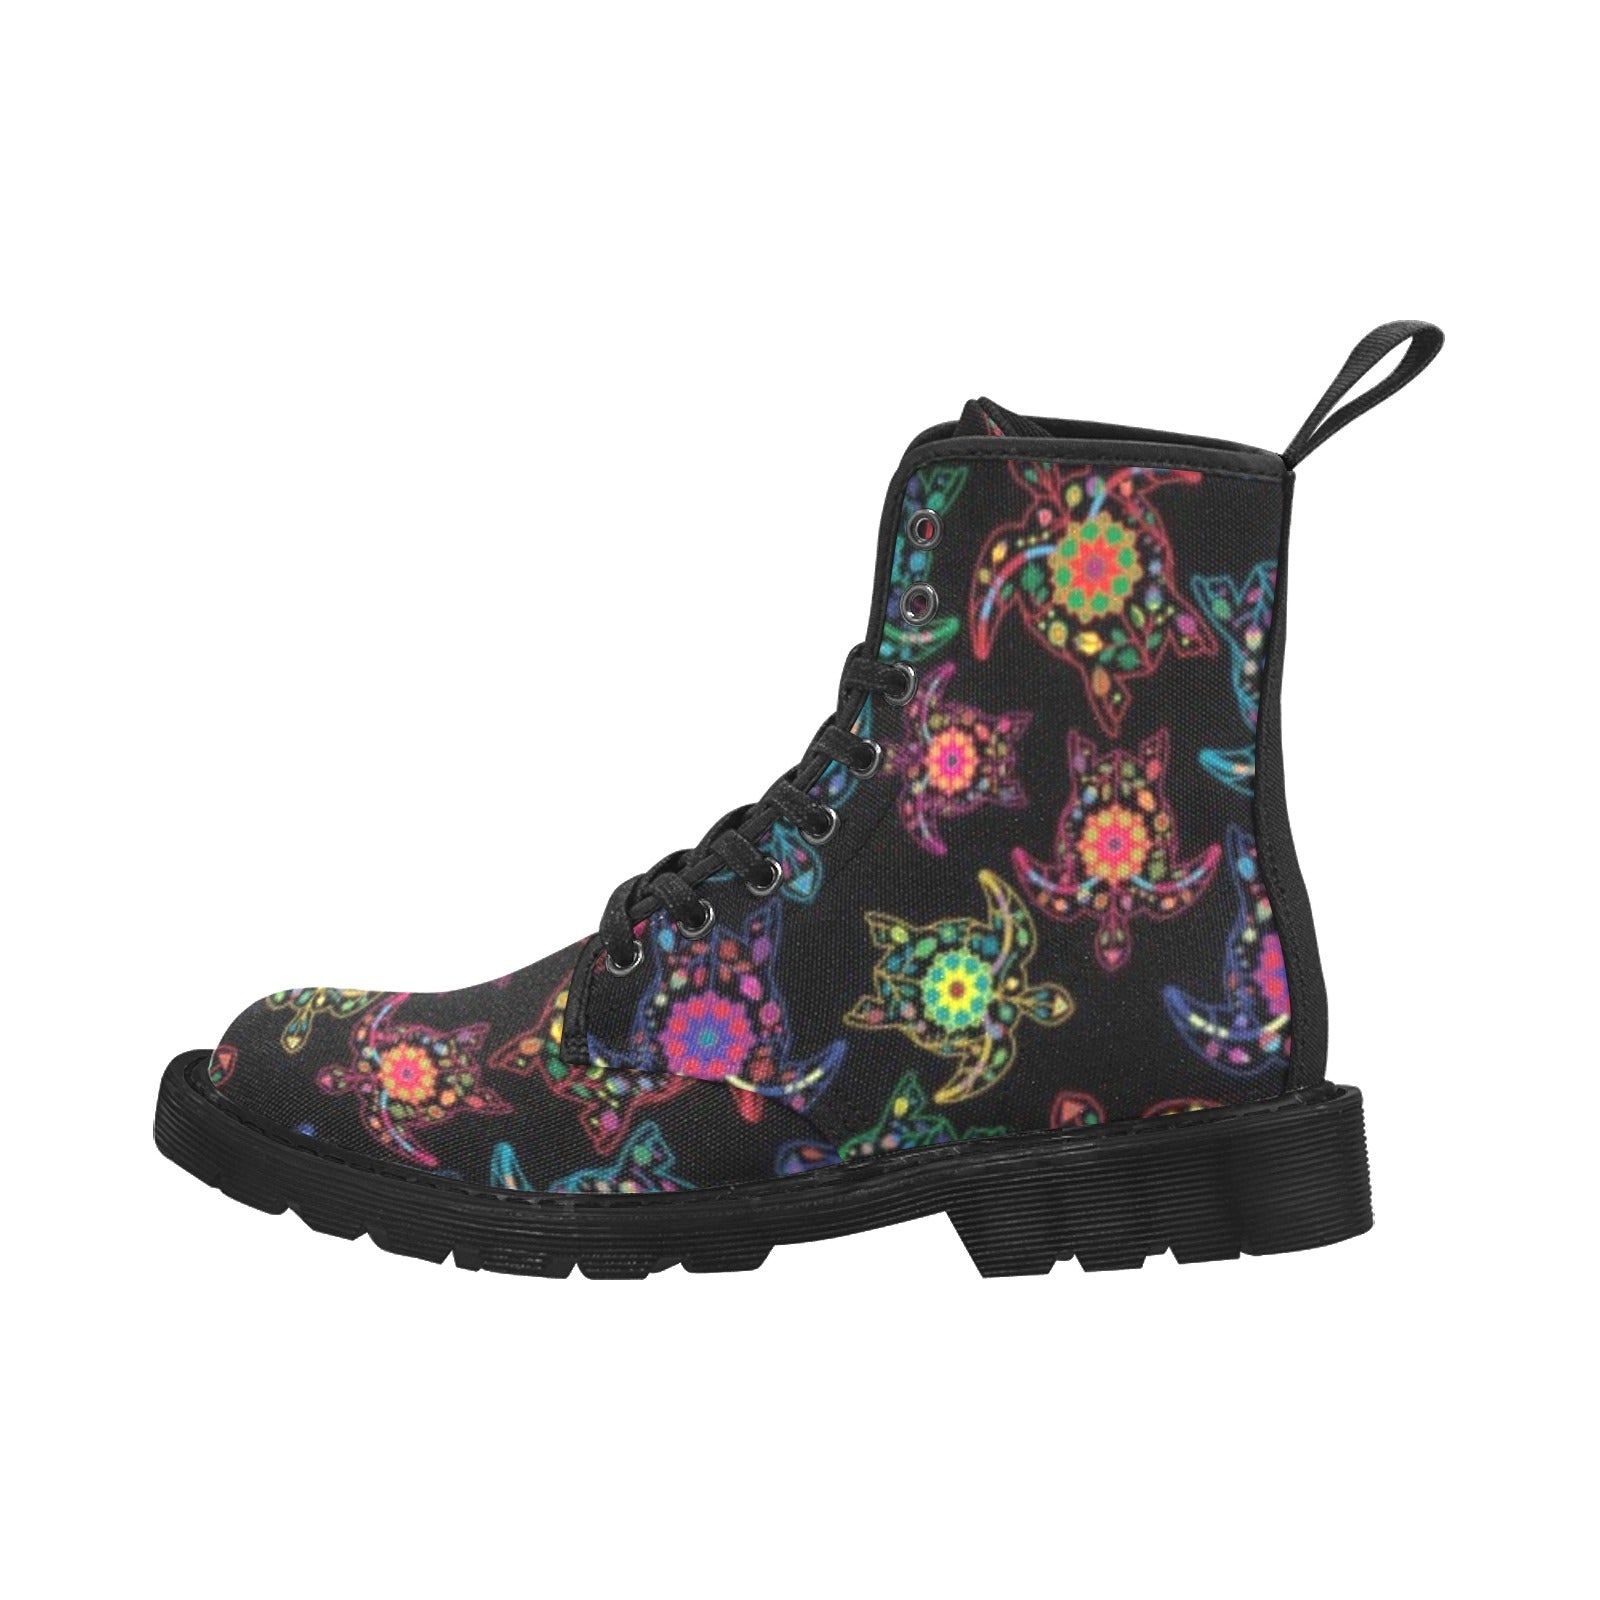 Neon Floral Turtle Boots for Women (Black)